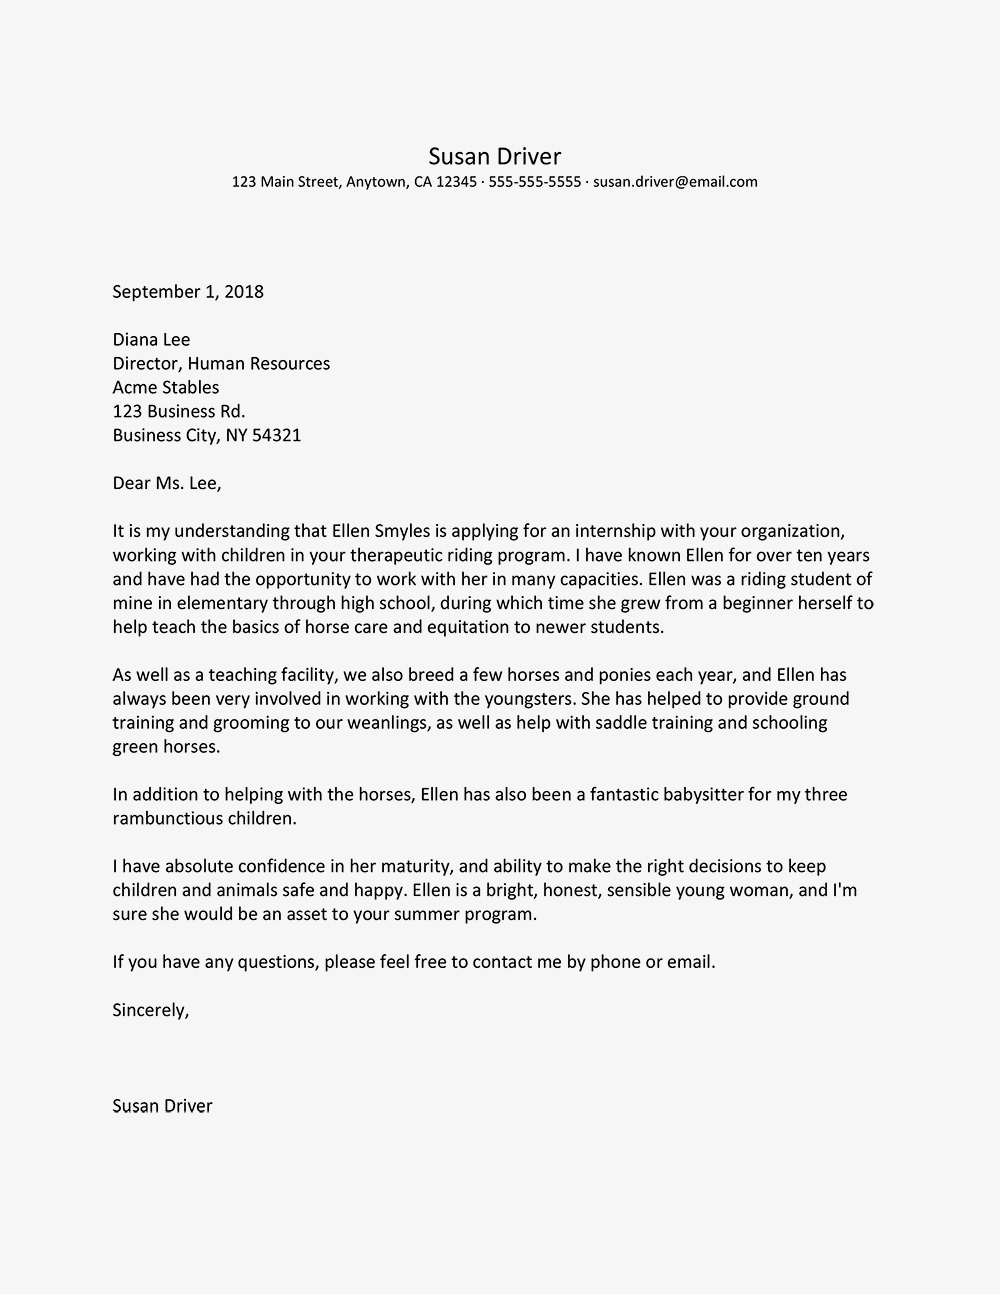 Recommendation Letter For Intern Debandje for dimensions 1000 X 1294